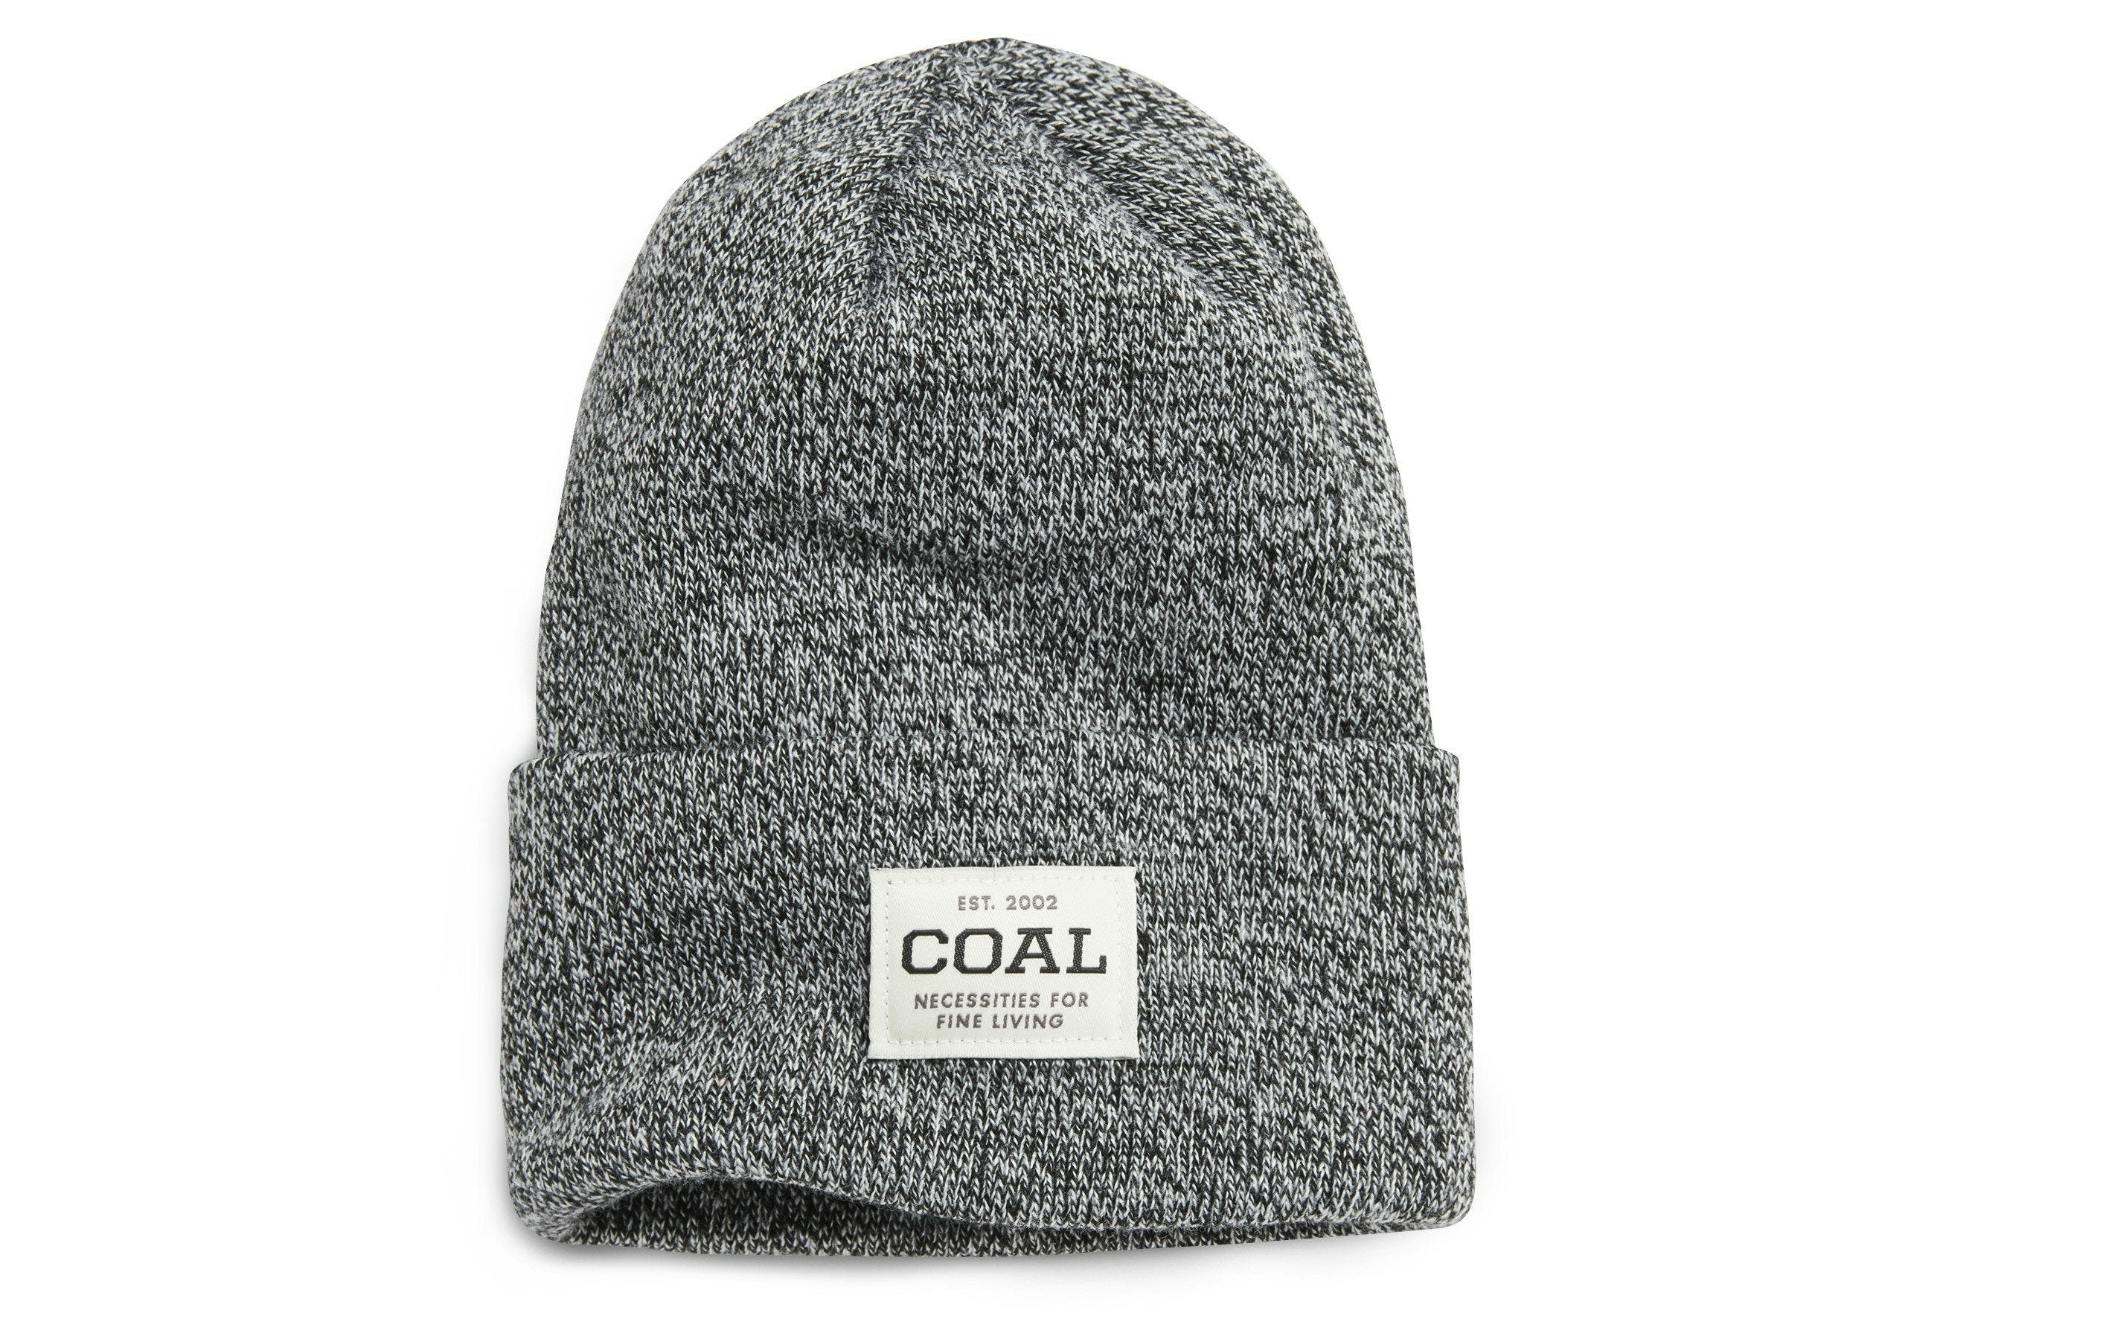 Product image of the Coal Uniform Beanie.